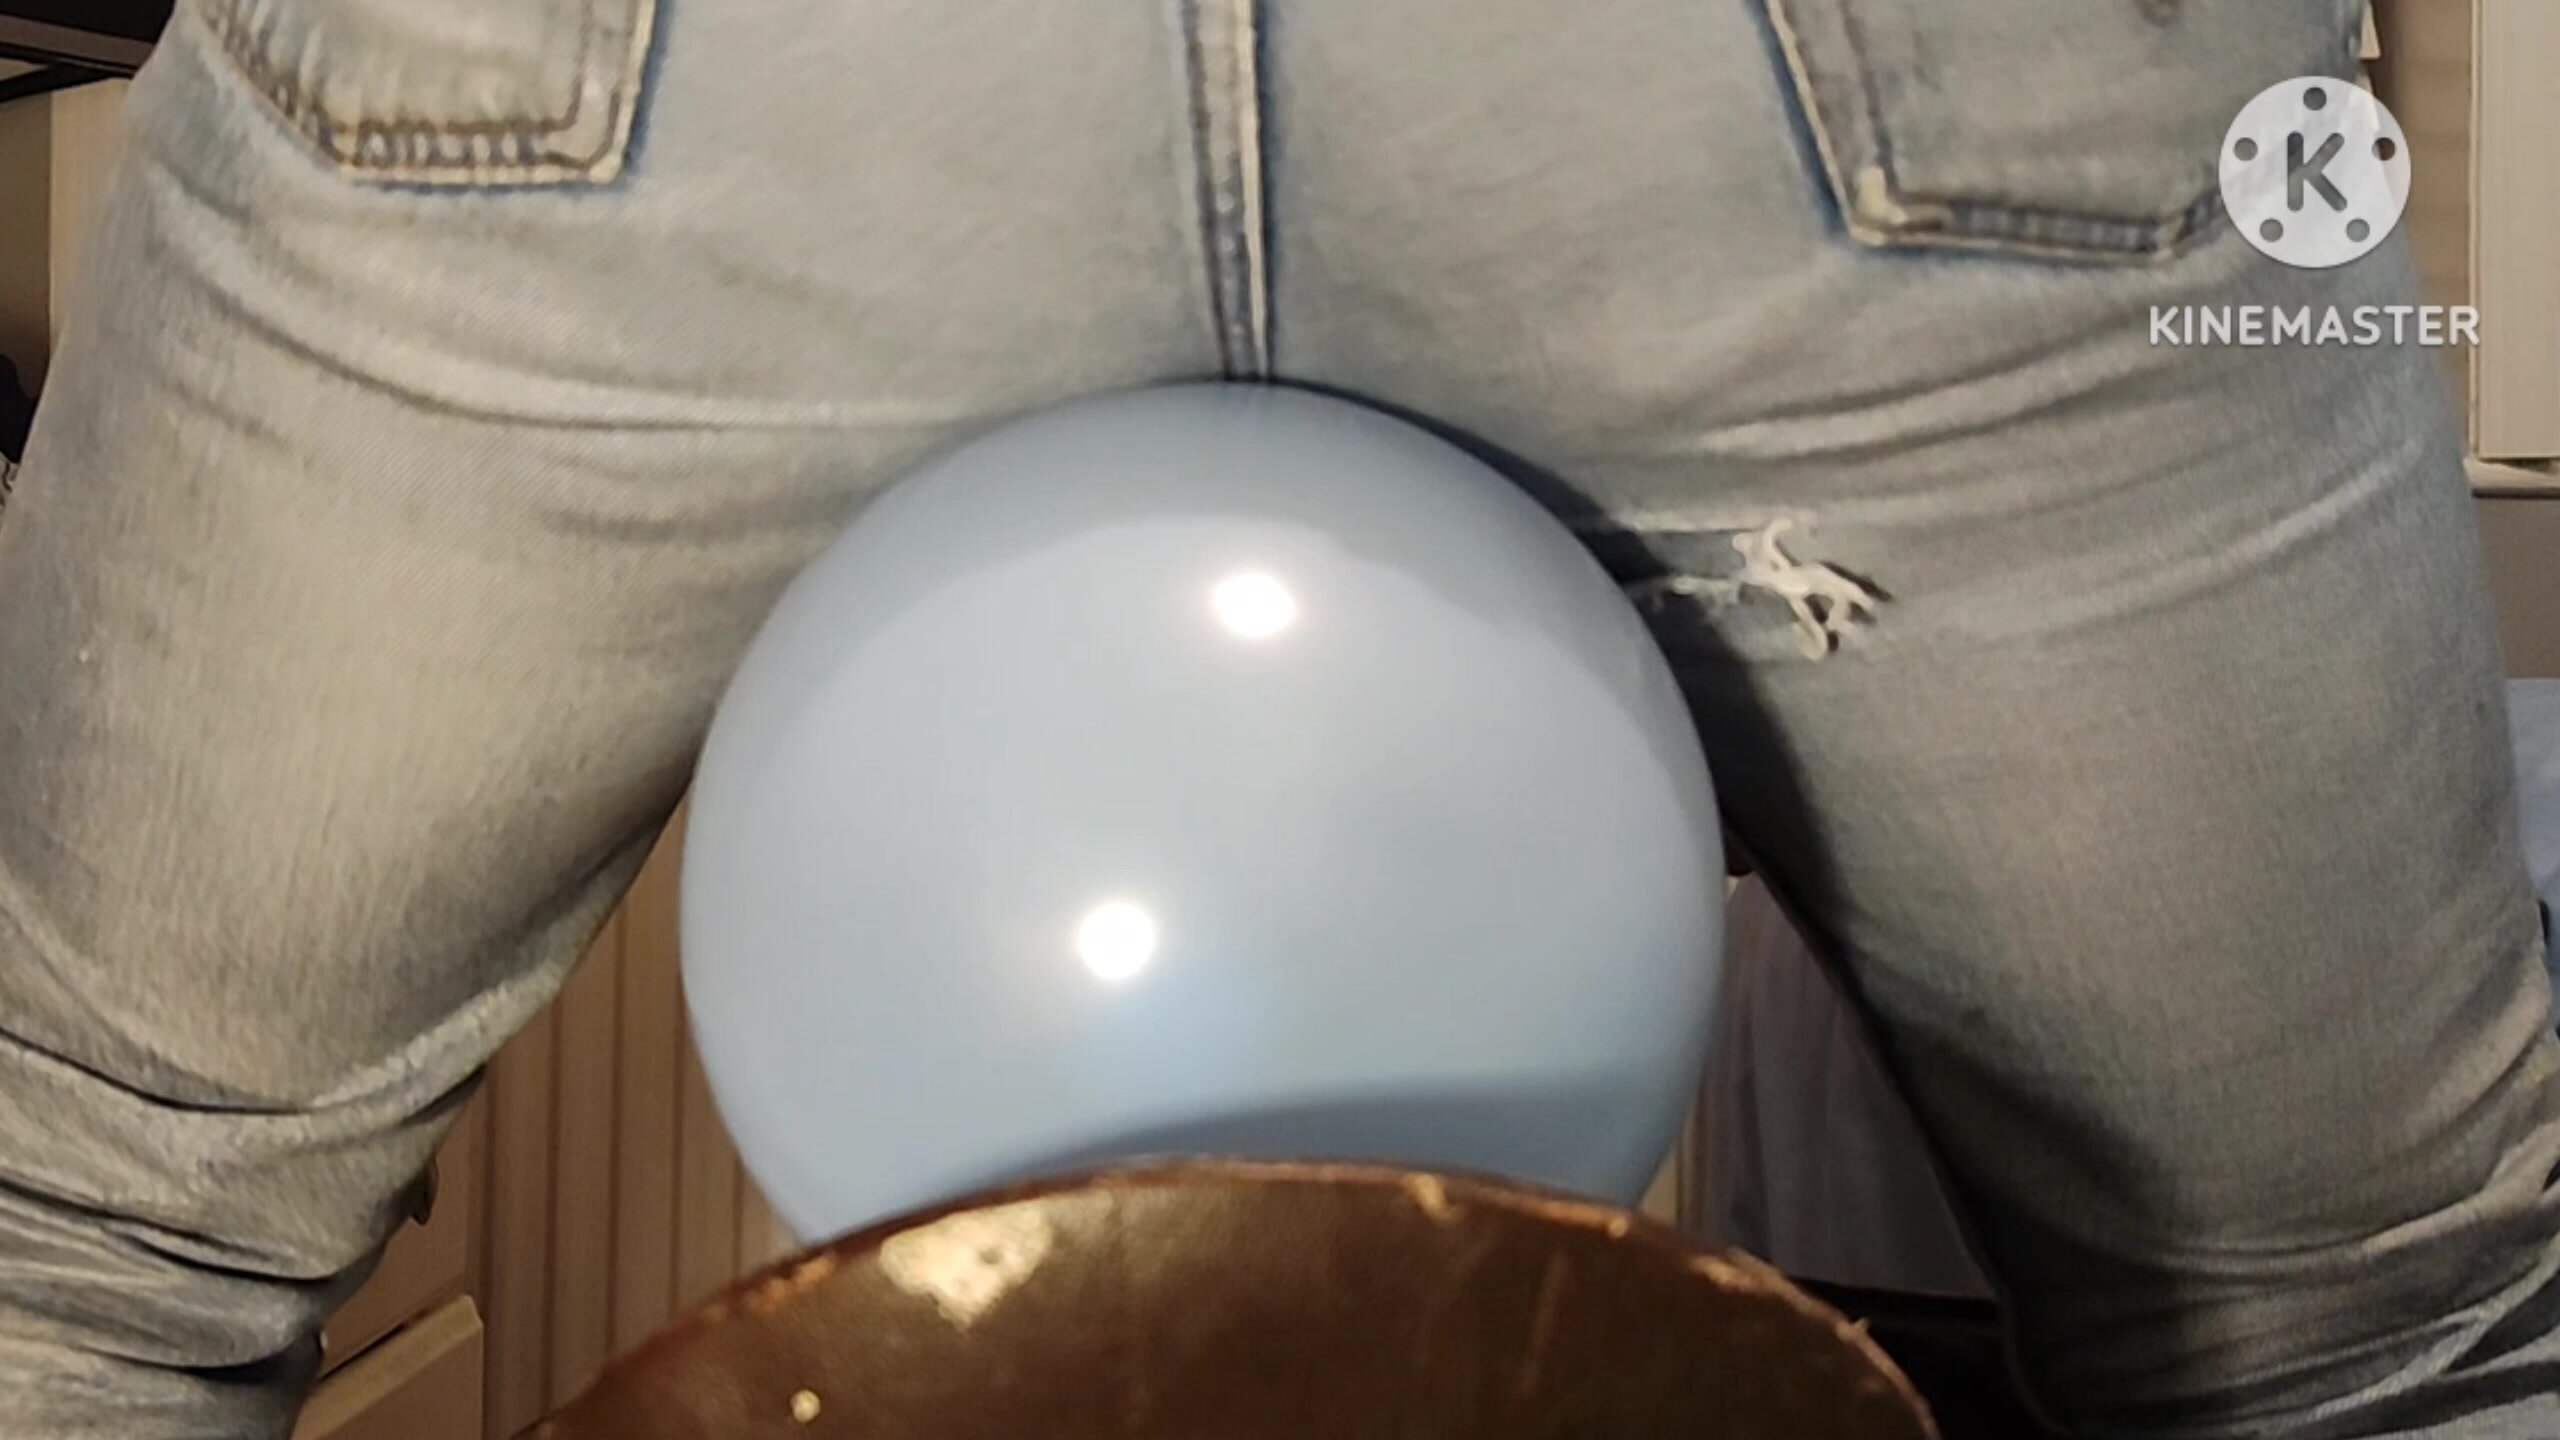 Requested balloon popping video tight levis